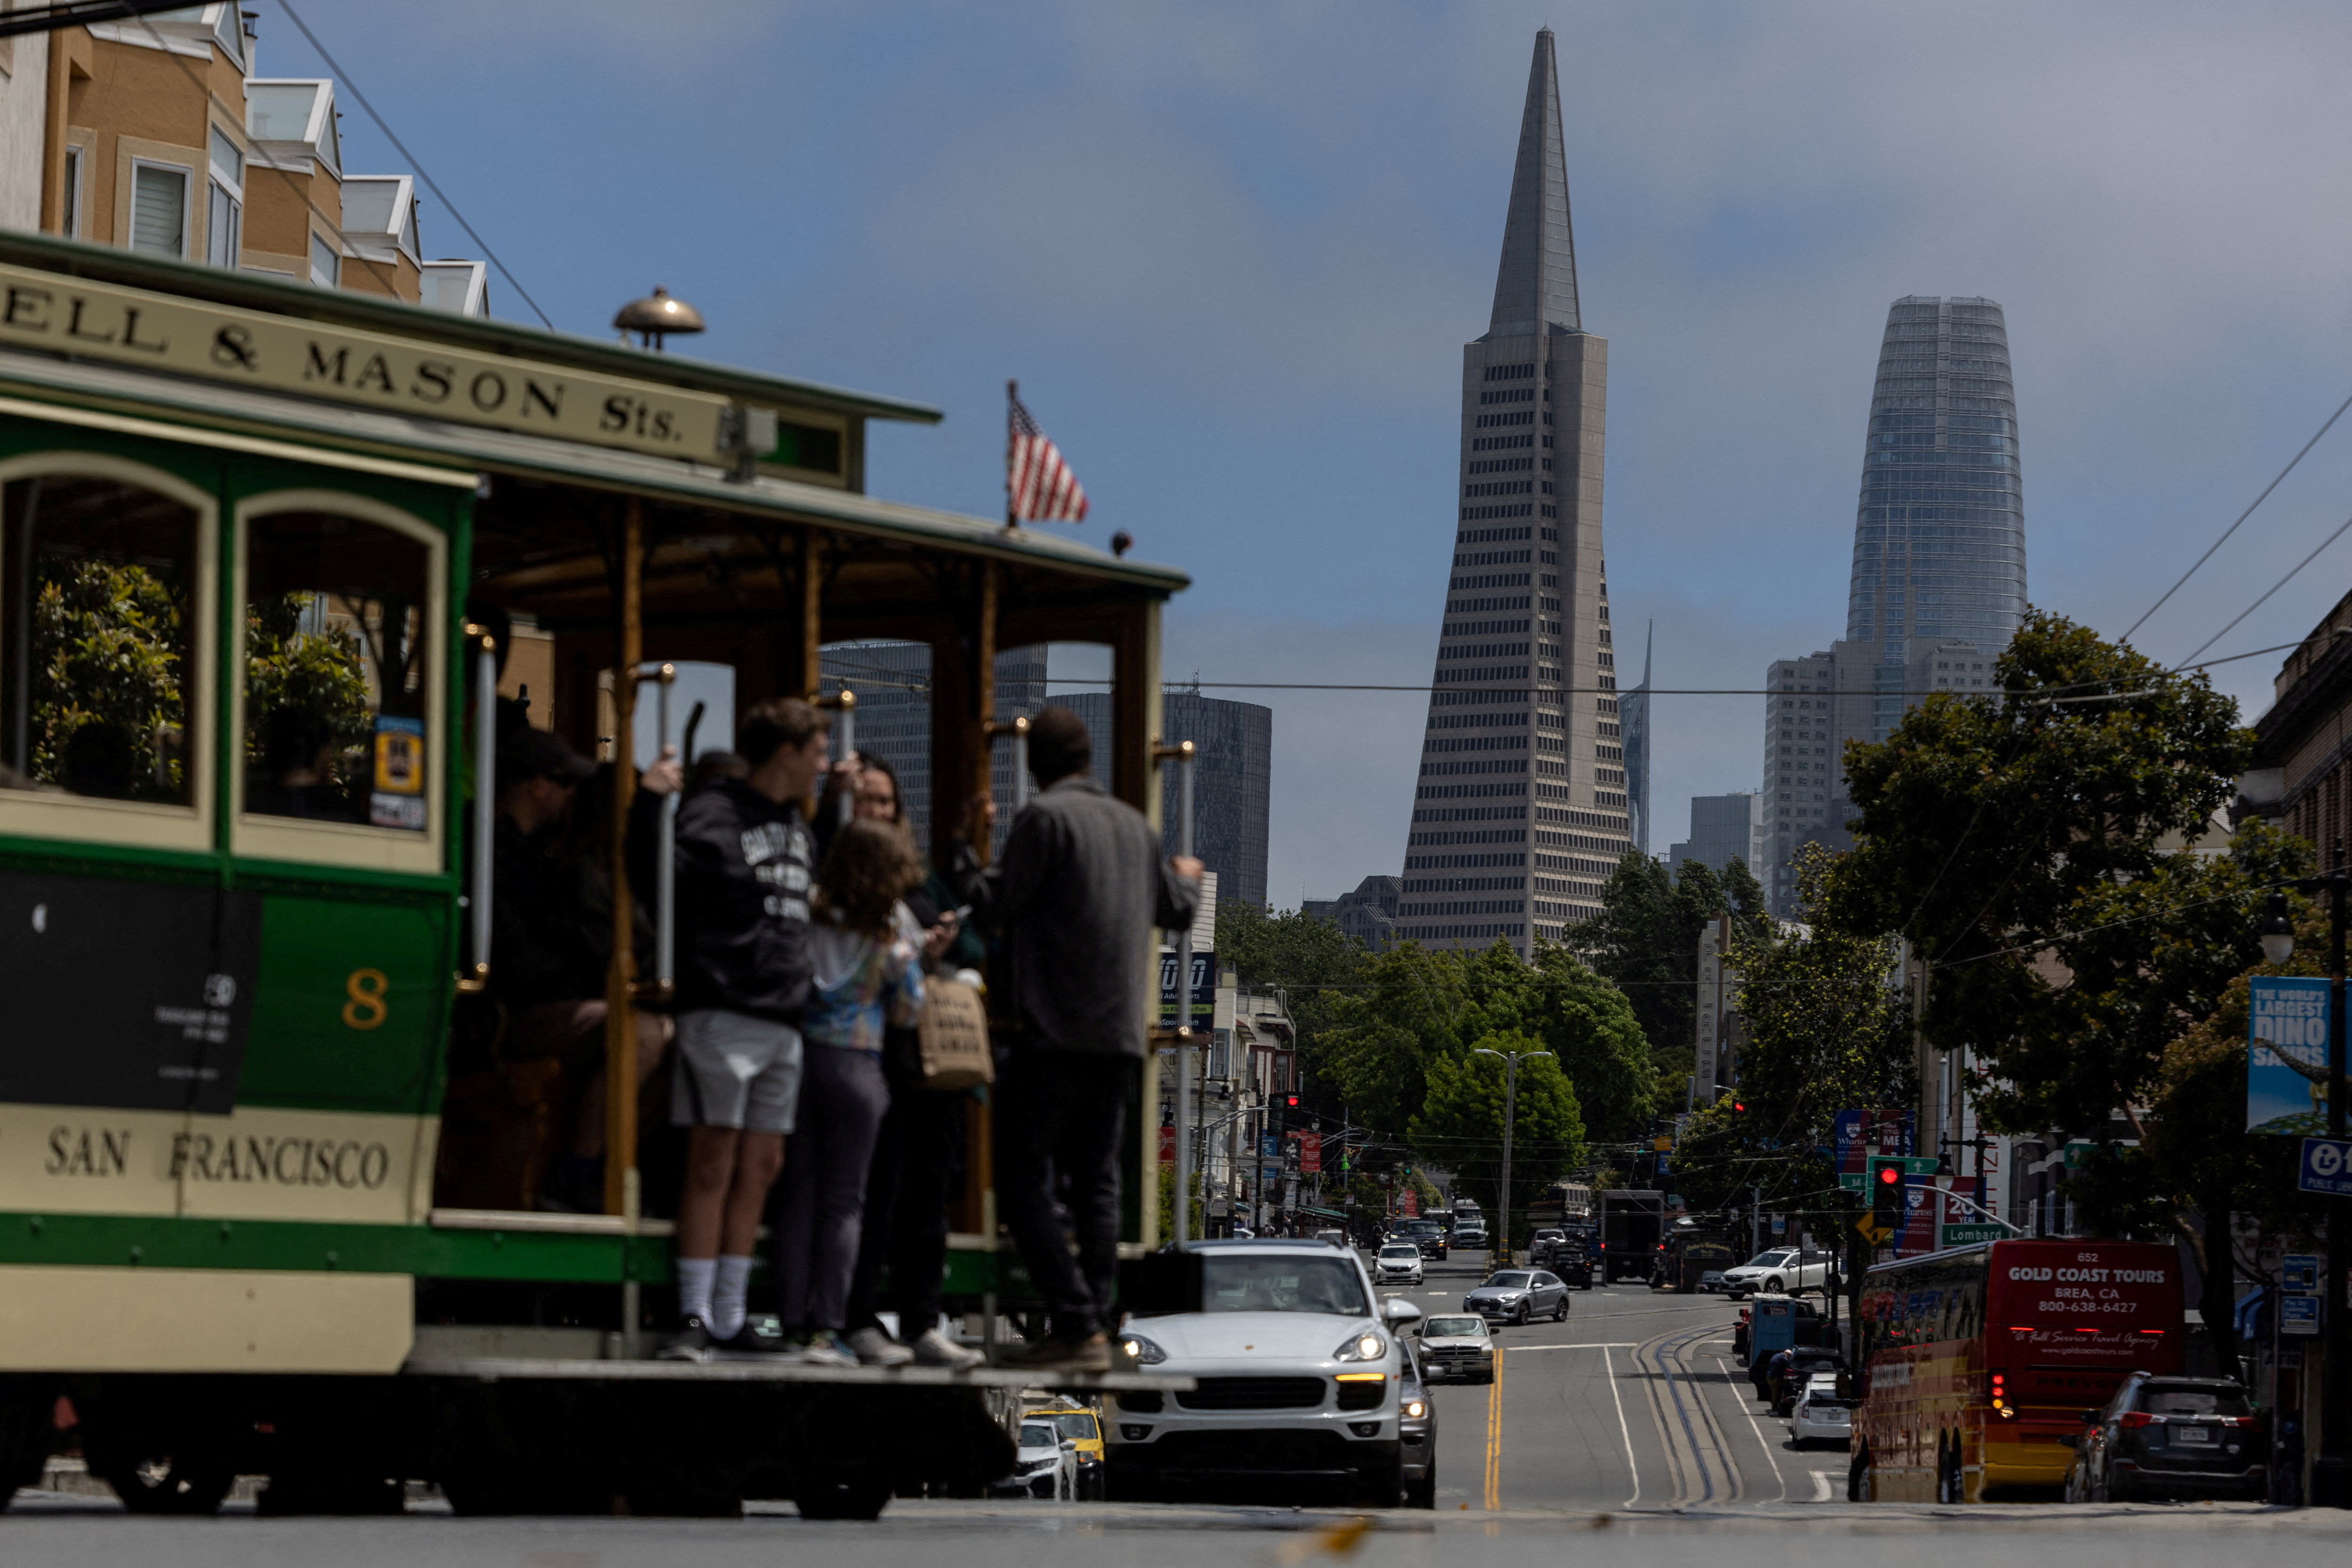 The Transamerica Pyramid building is seen as tourists ride a cable car in downtown San Francisco